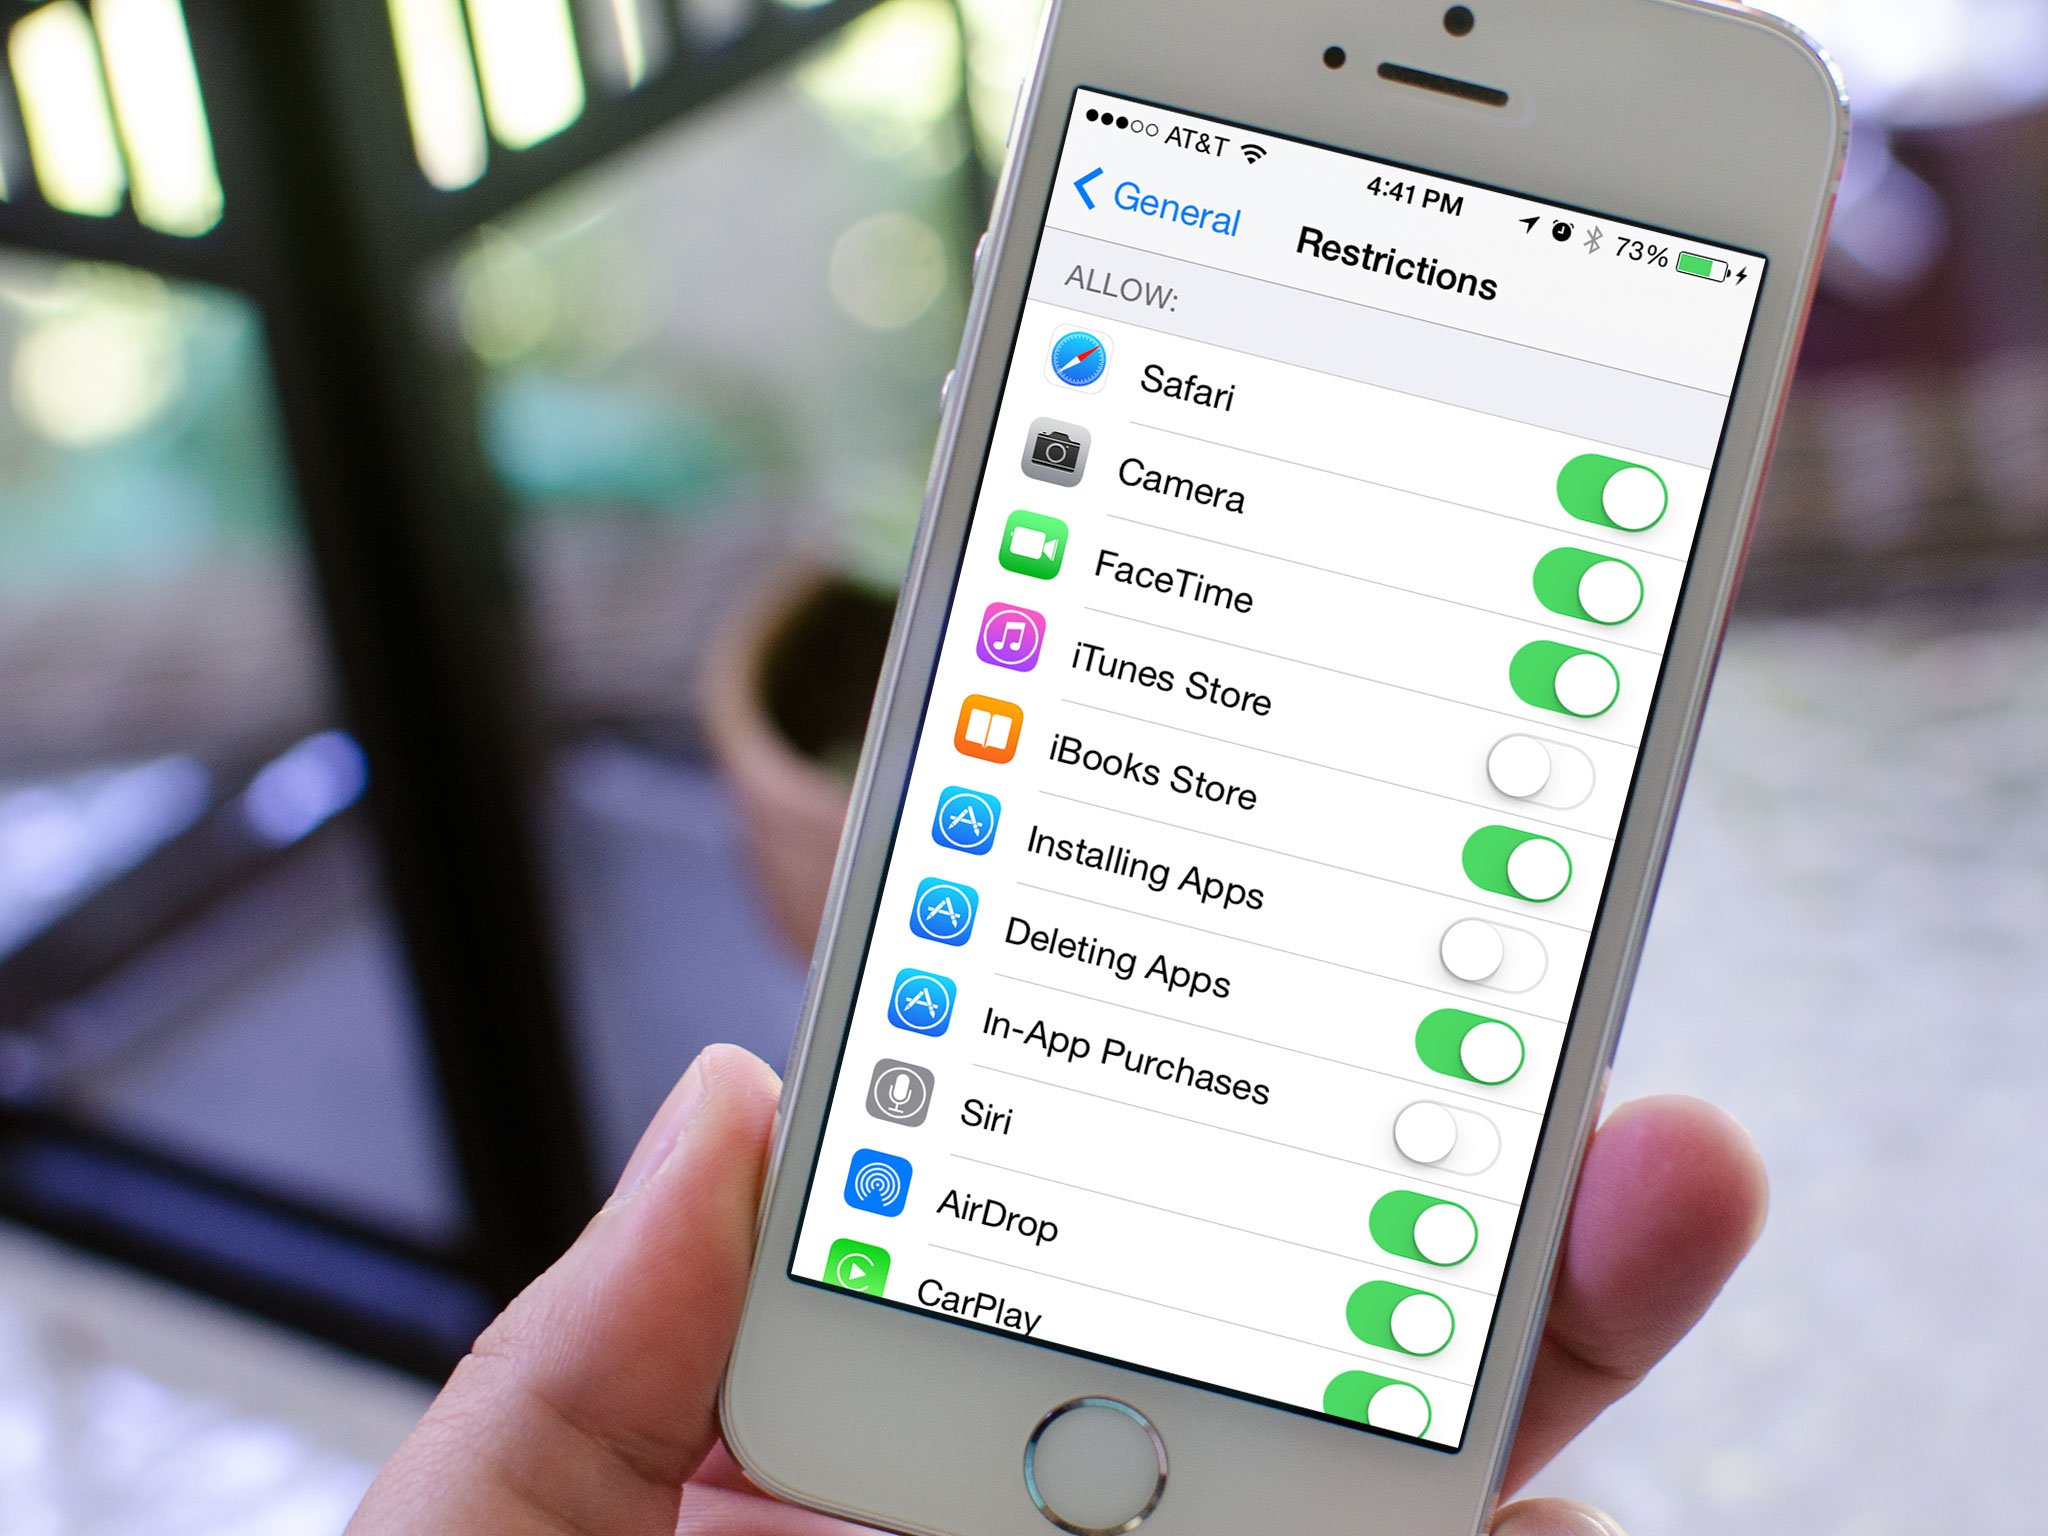 How to enable parental control restrictions on your iPhone or iPad